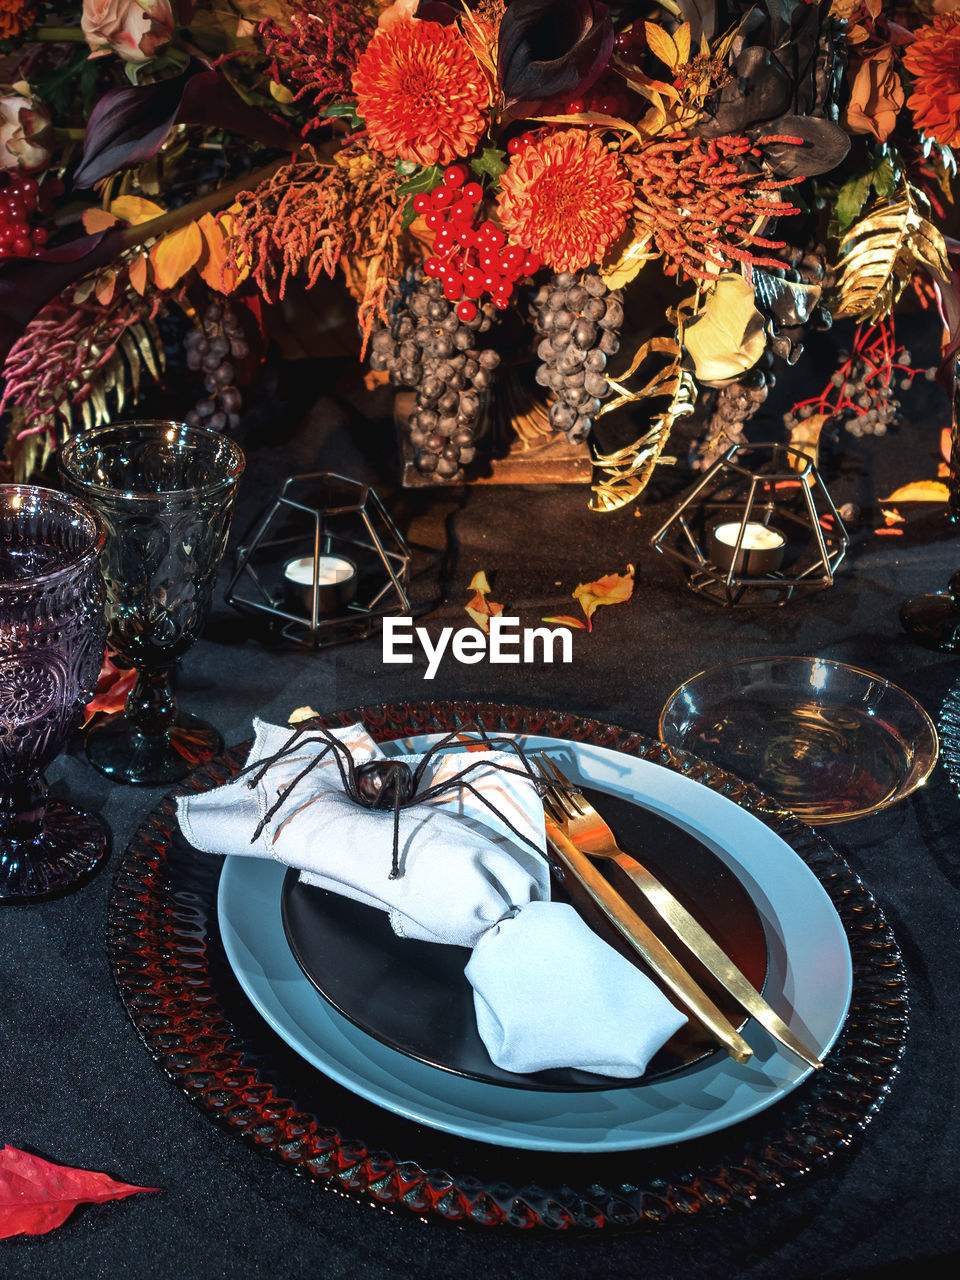 Table served in black halloween style. bouquet with red flowers, decorative spiders, pumpkins.